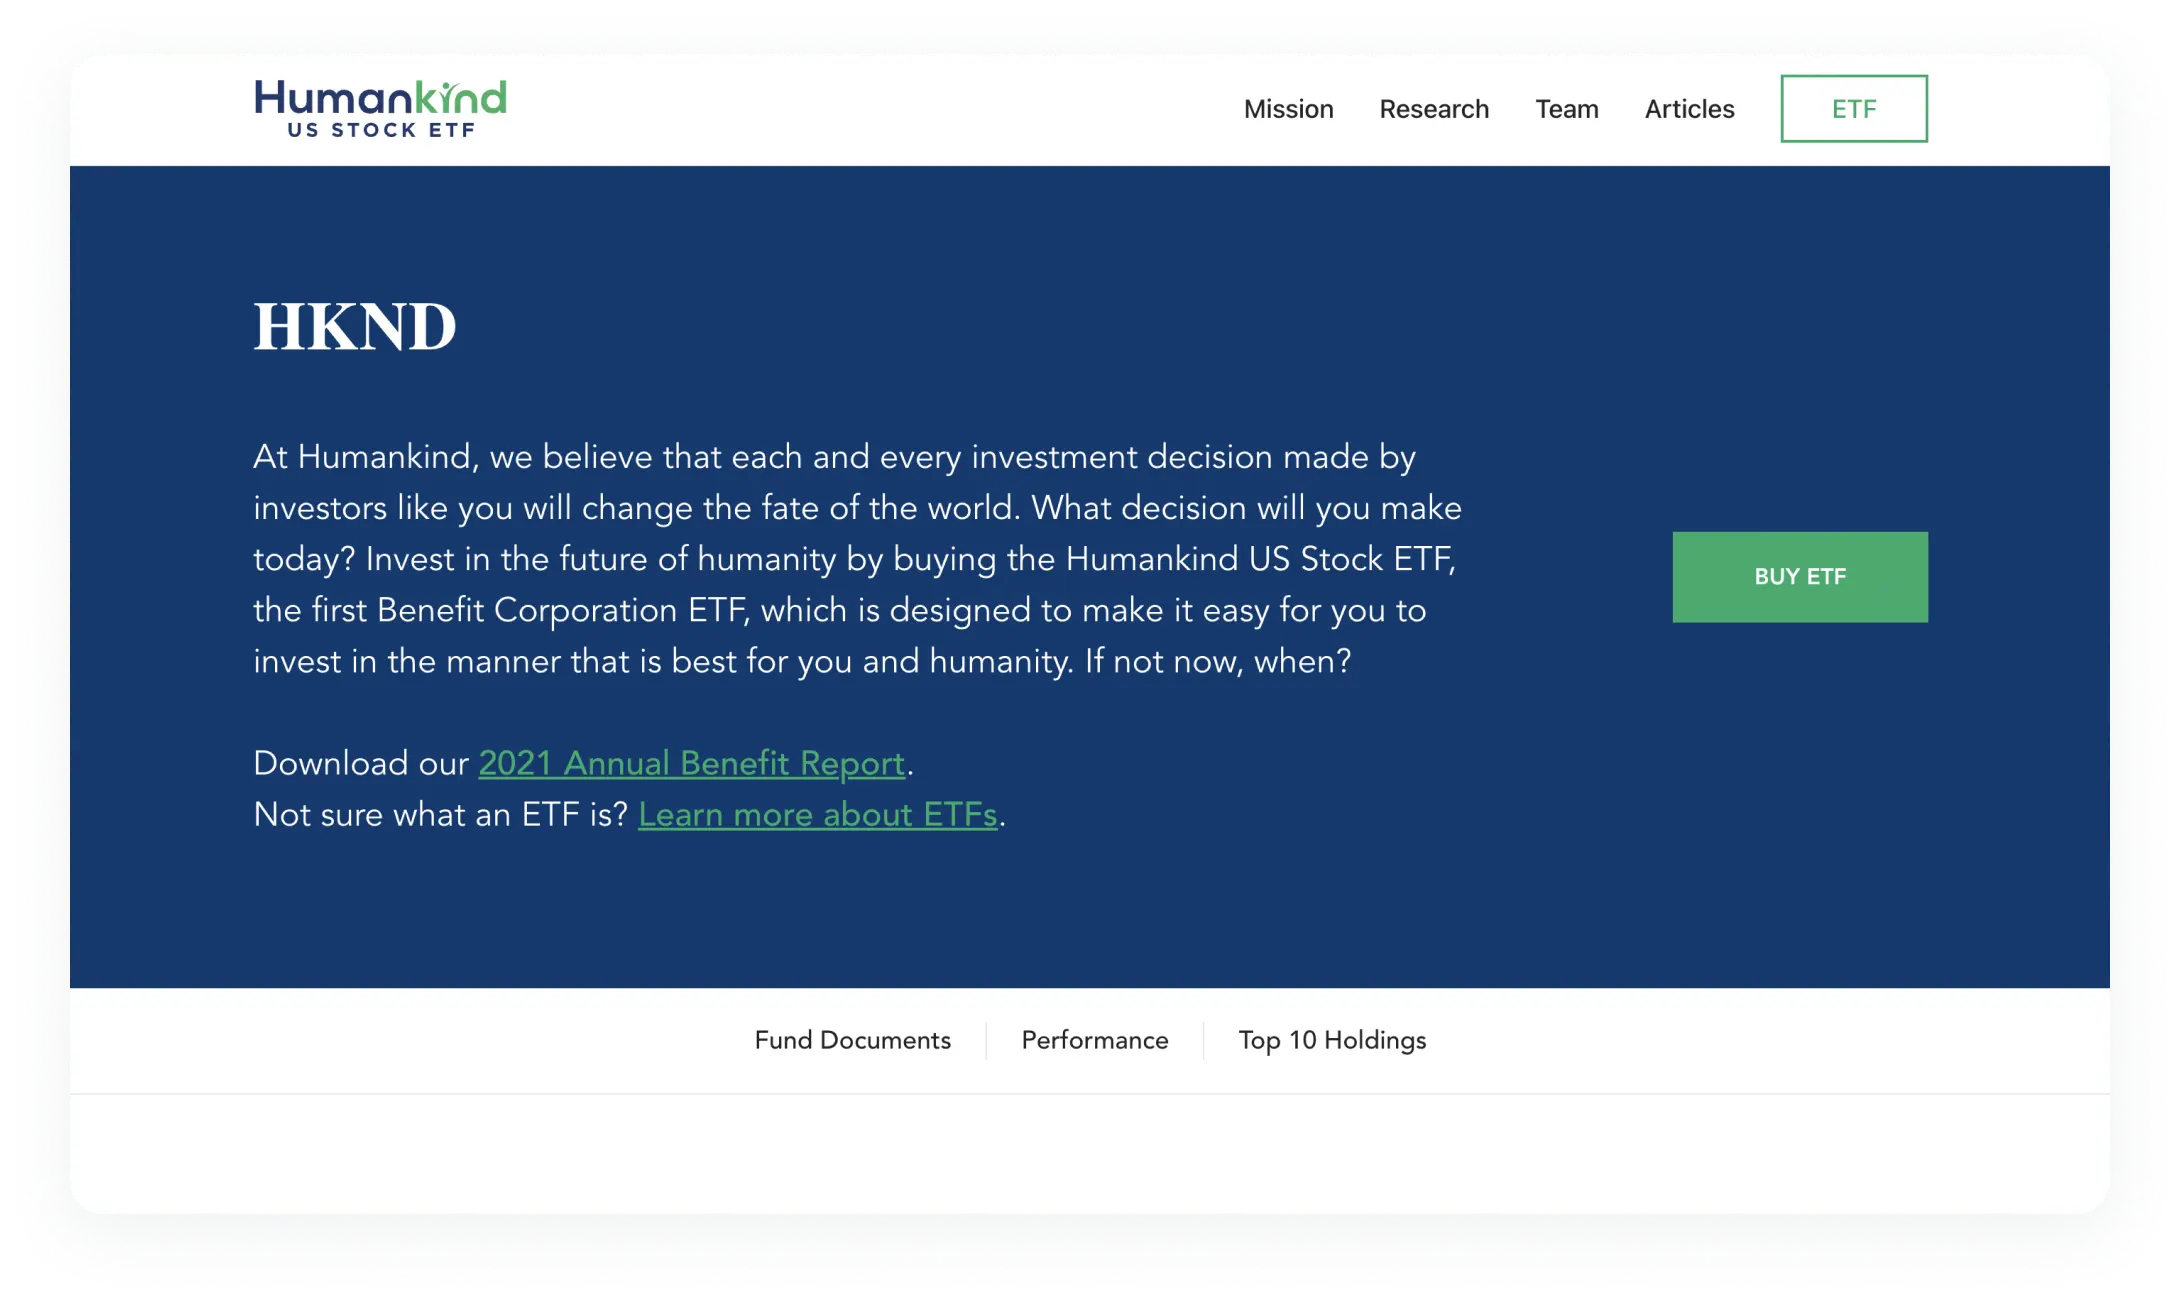 YWS > Works > CaseStudy > Humankind > Project’s key features > ETF website > Image